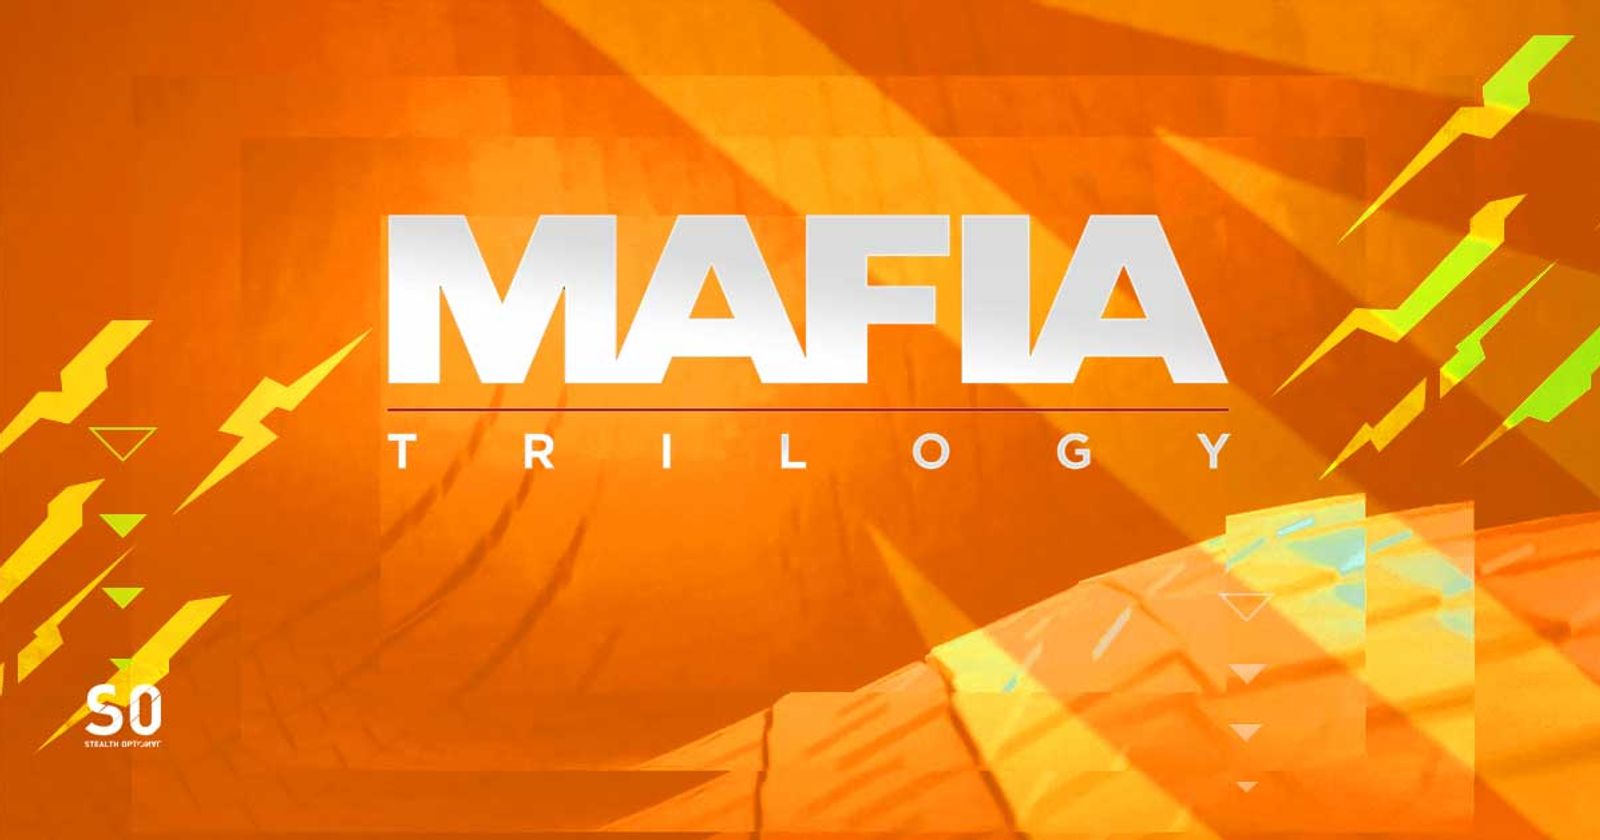 Which consoles is the Mafia Trilogy coming to? Is the new Mafia game bundle  on Nintendo Switch?